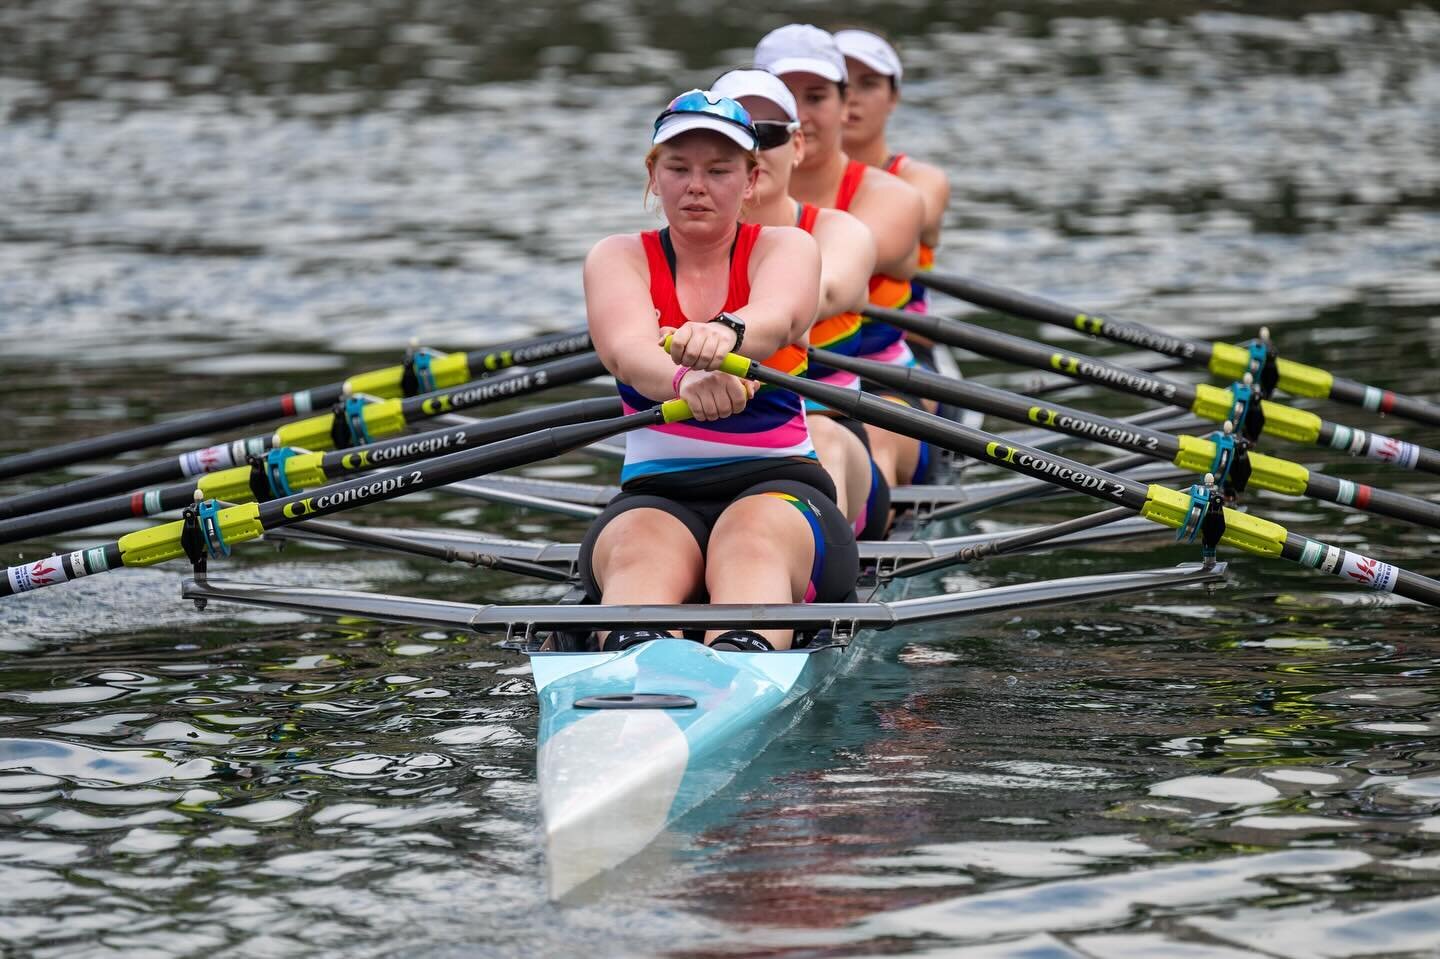 Hong Kong hosted this Gay Games rowing races at the iconic Shing Mun River which features over 4 km of flat water, against the shining lights of the satellite town of Shatin.